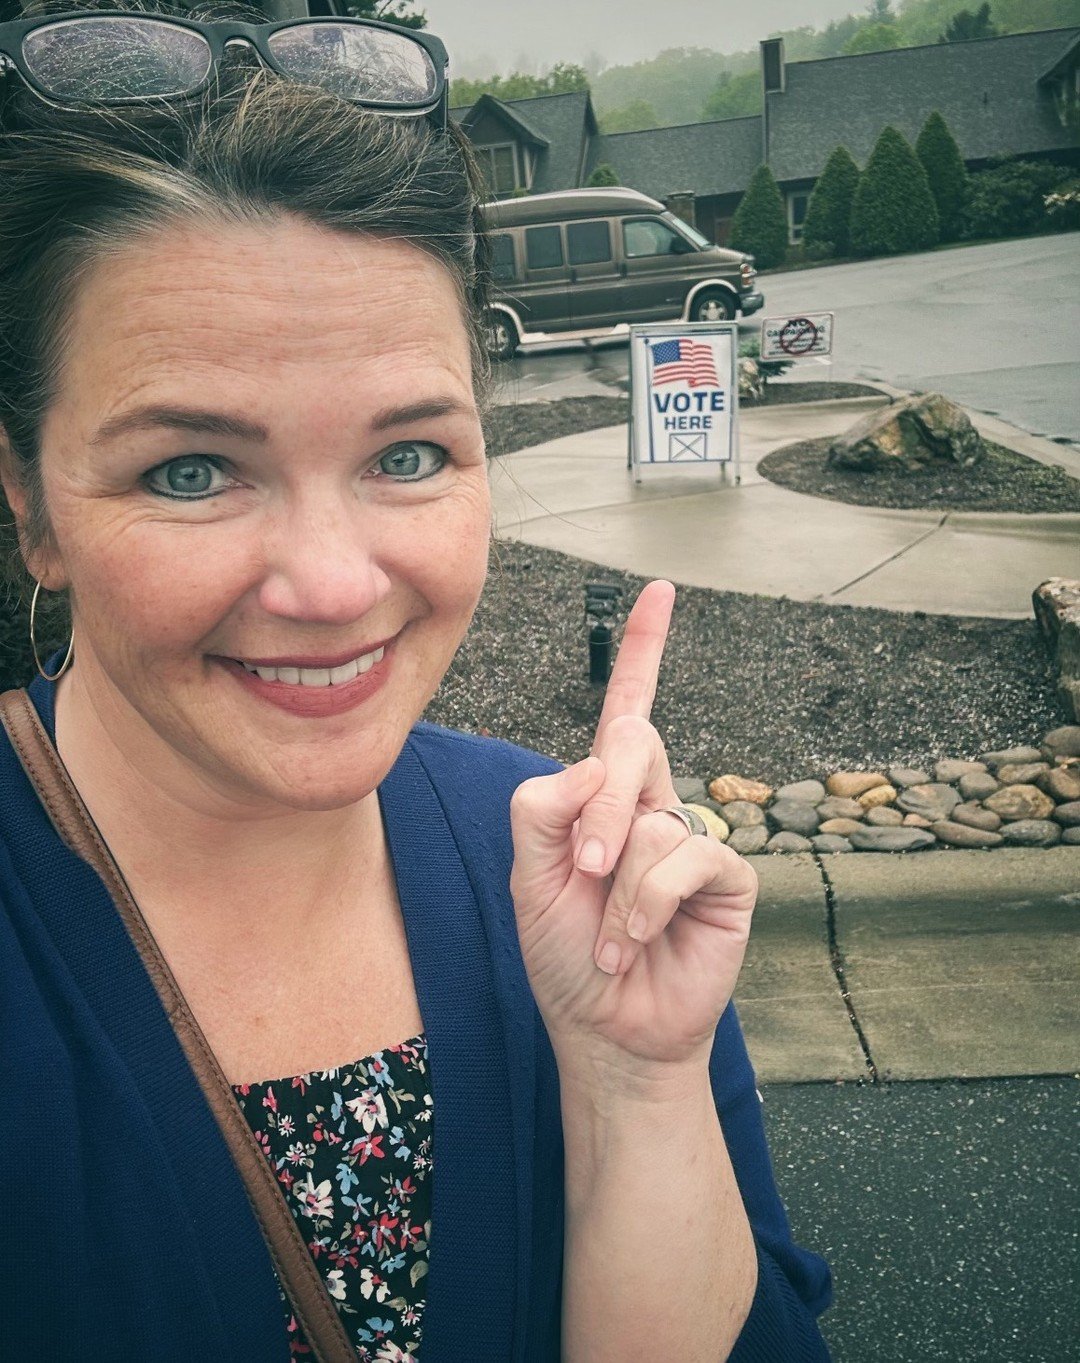 Friends, don&rsquo;t forget about today&rsquo;s primary election runoff! Exercising our rights as citizens is vital, and I was proud to place my vote earlier today at my precinct in Blowing Rock, NC &mdash; voter #15 of the day! 

#PrimaryElection #N